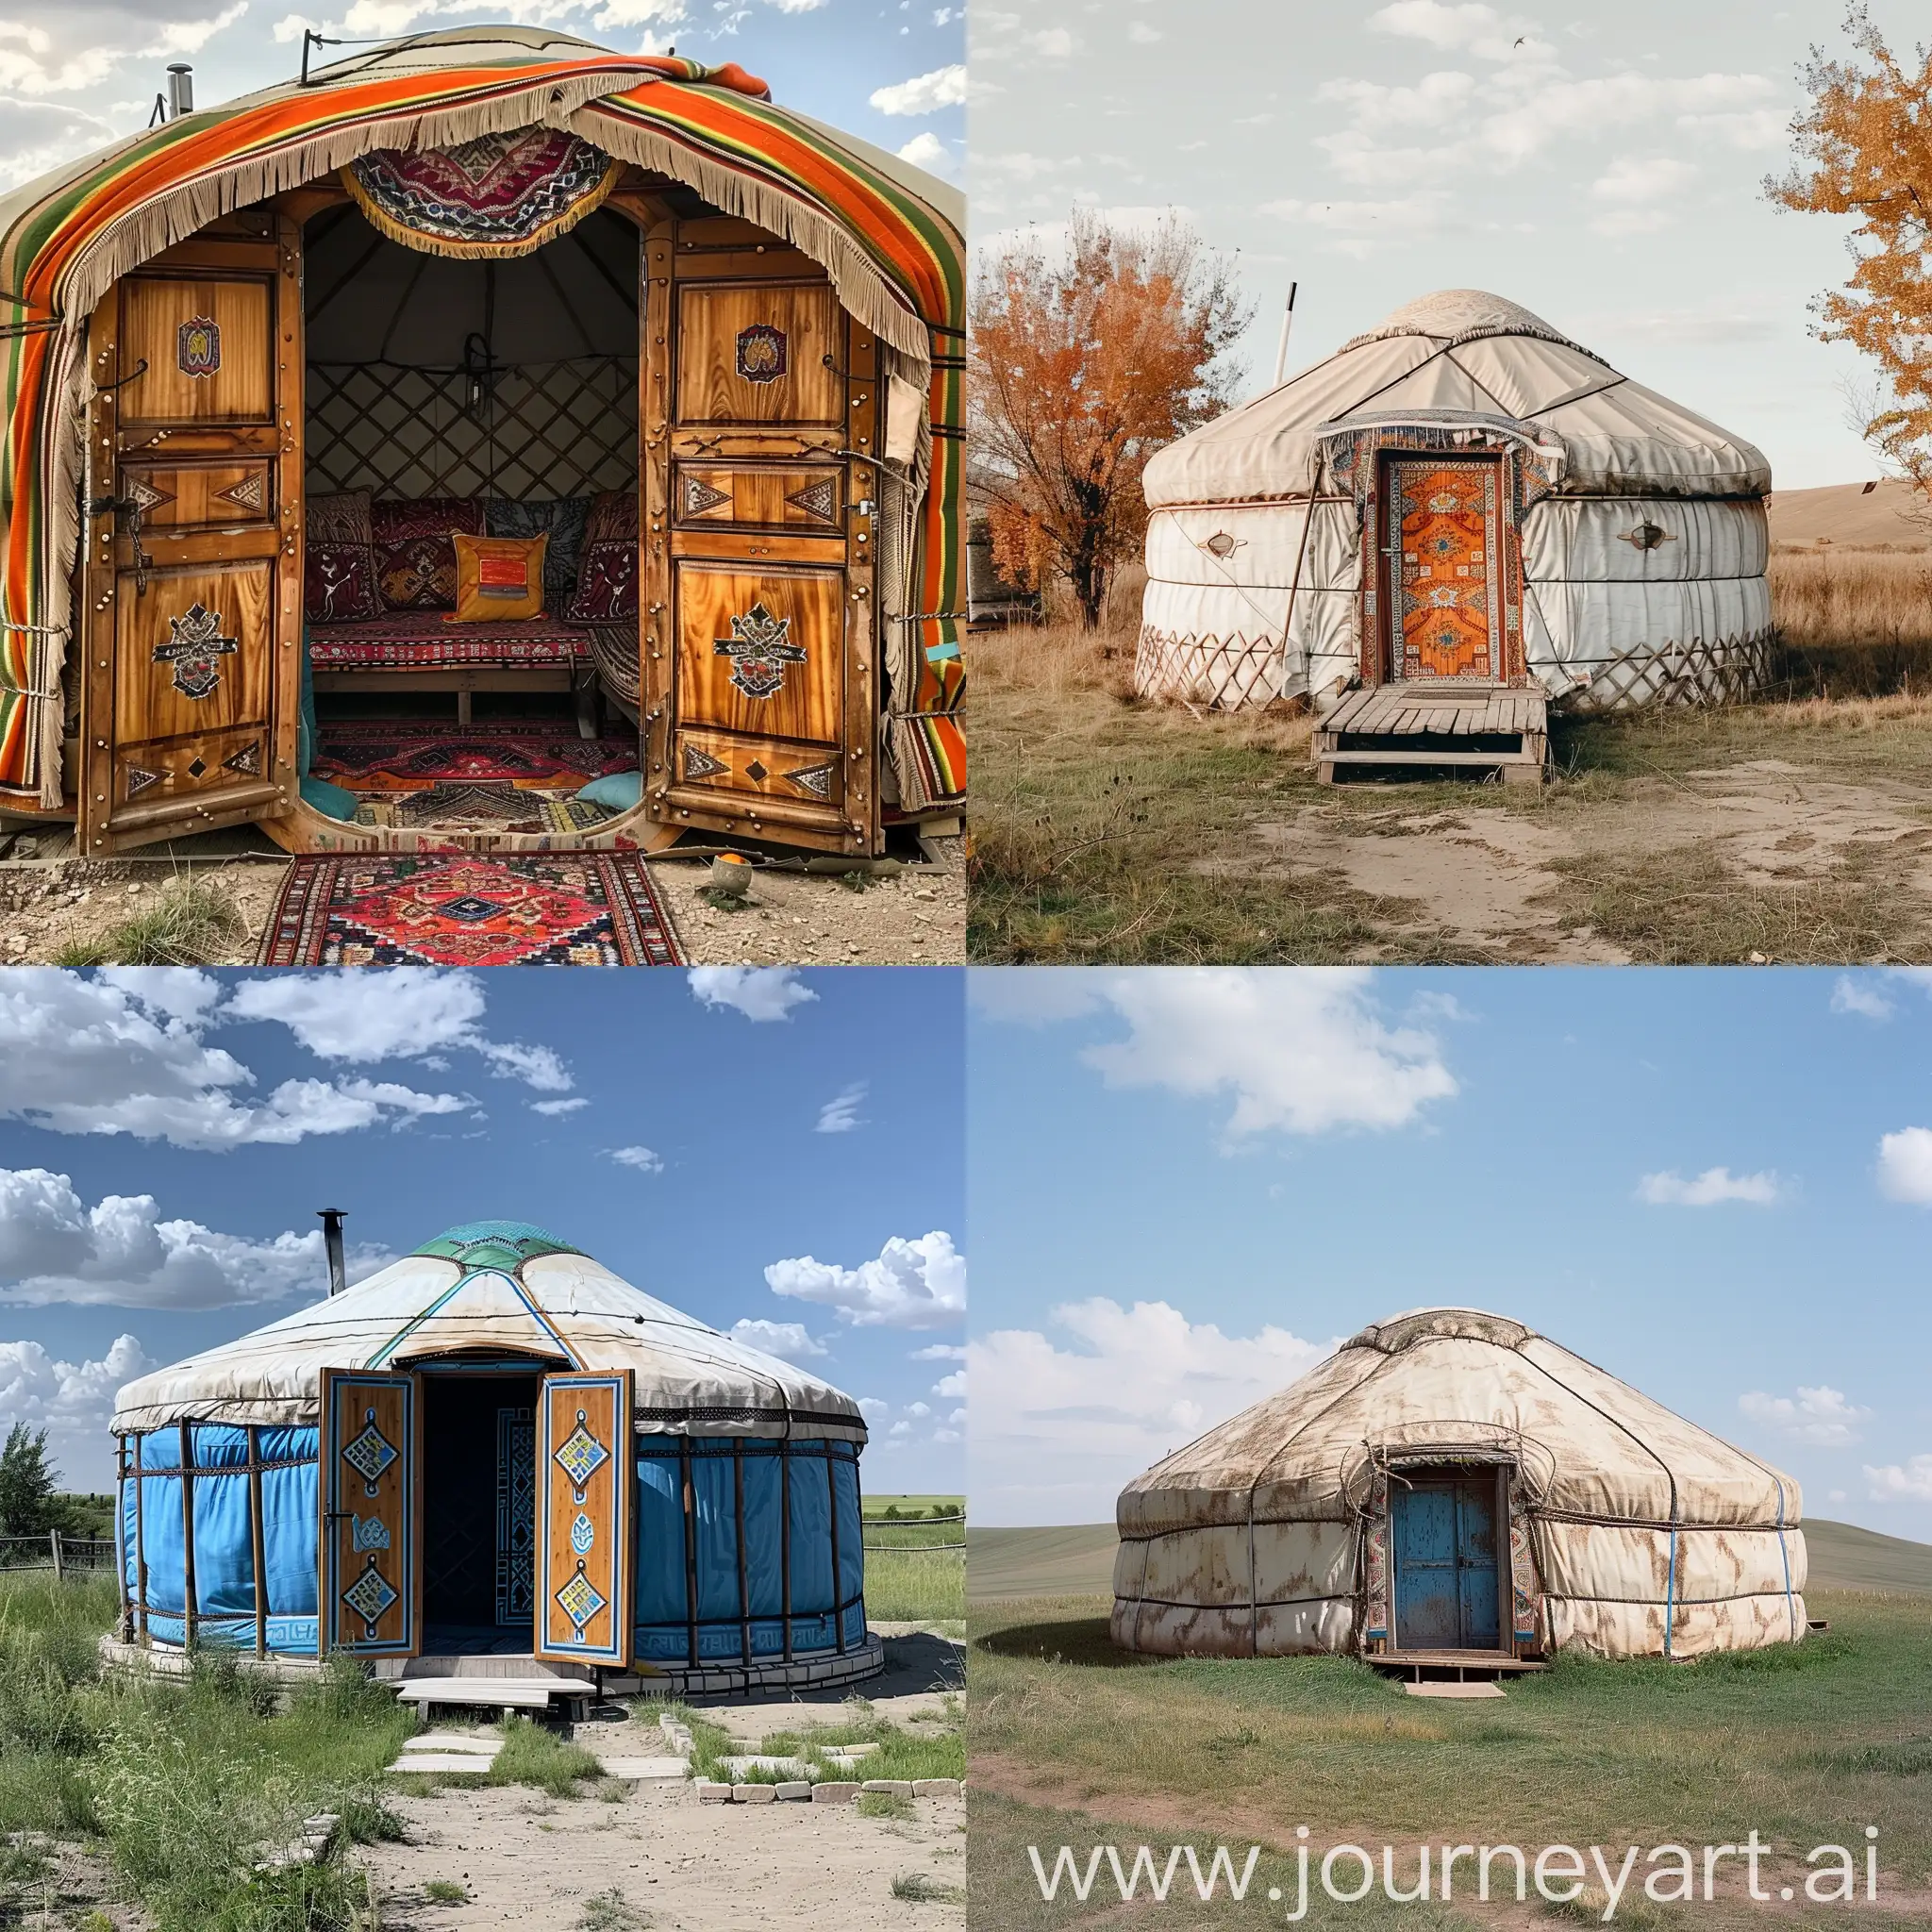 Traditional-Kazakh-Yurt-with-Ornate-Patterns-Cultural-Architecture